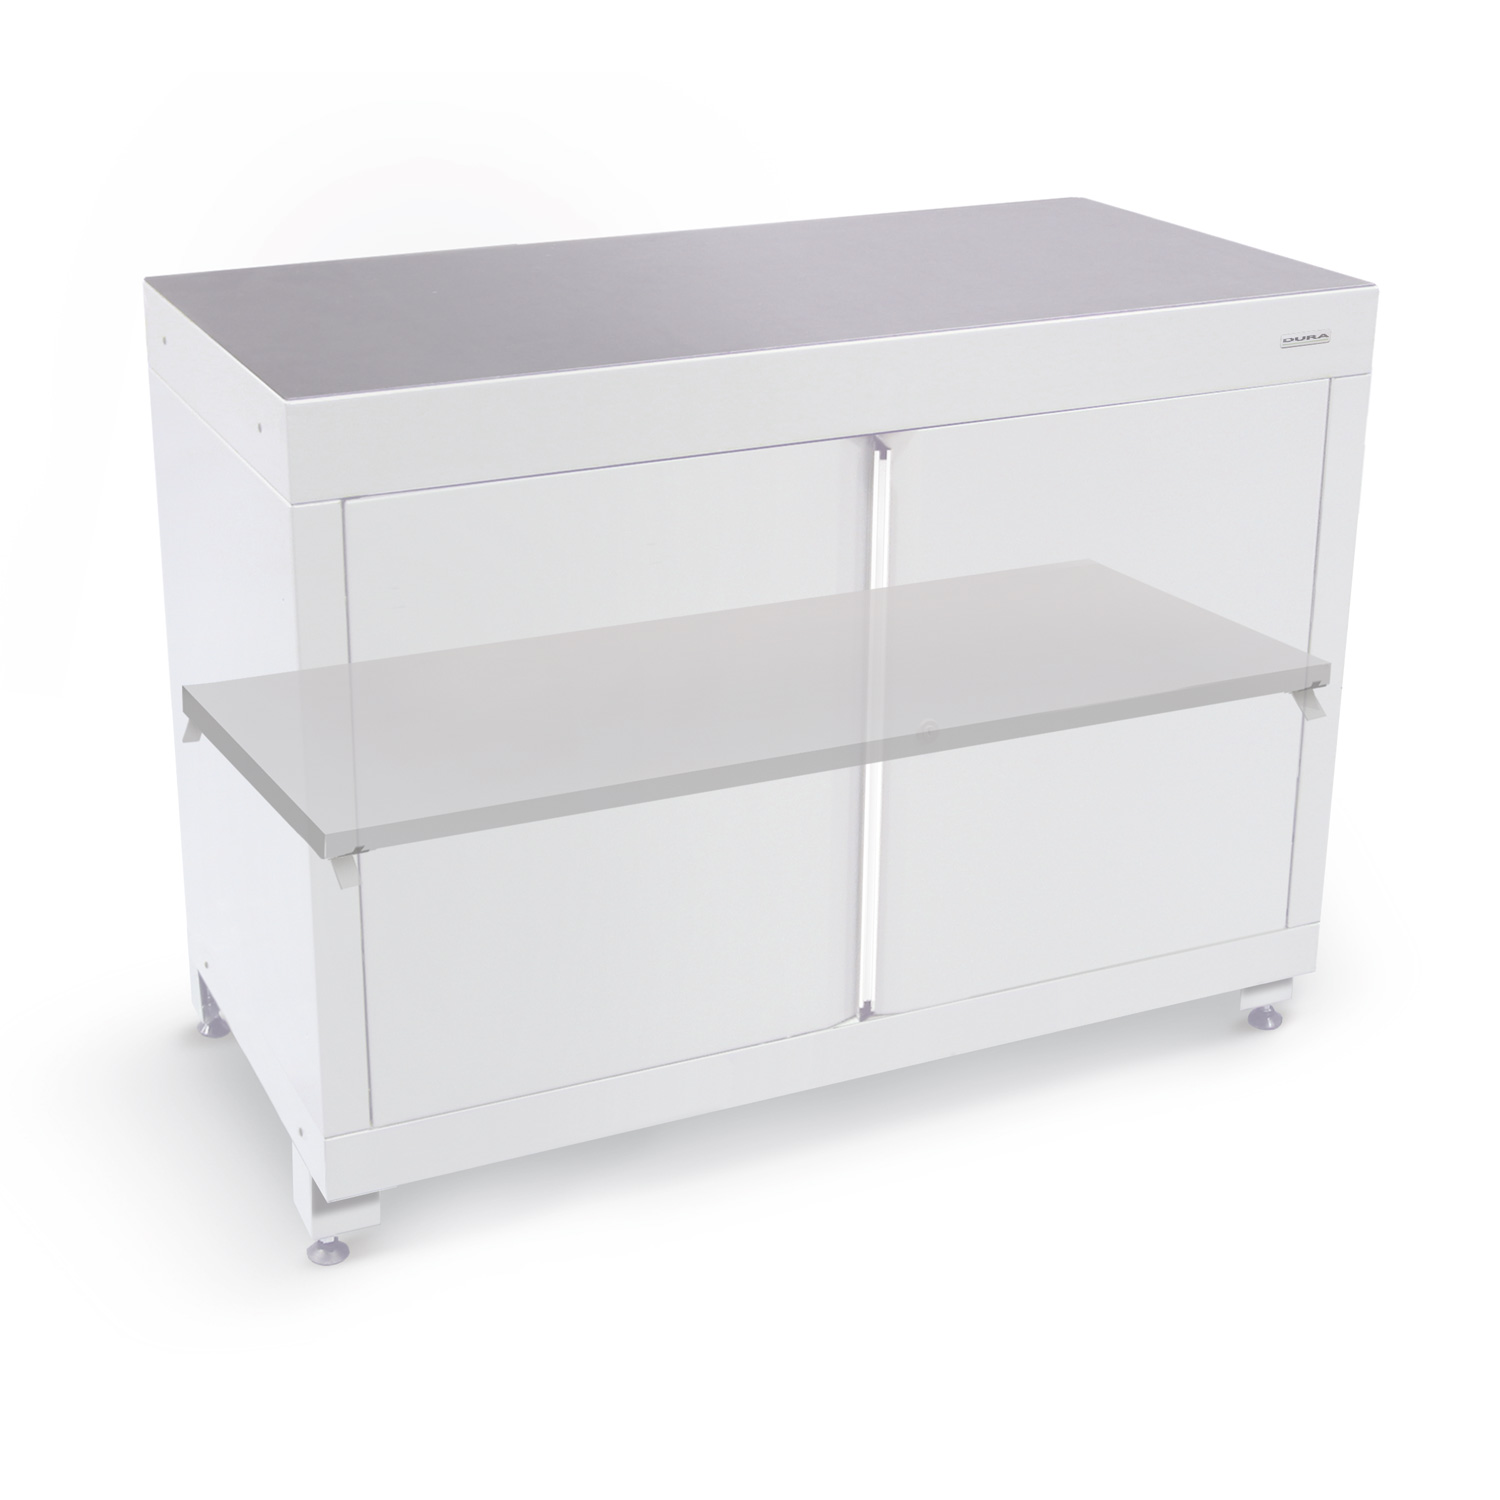 Additional shelf for BU-120, RS-060 or RS-062